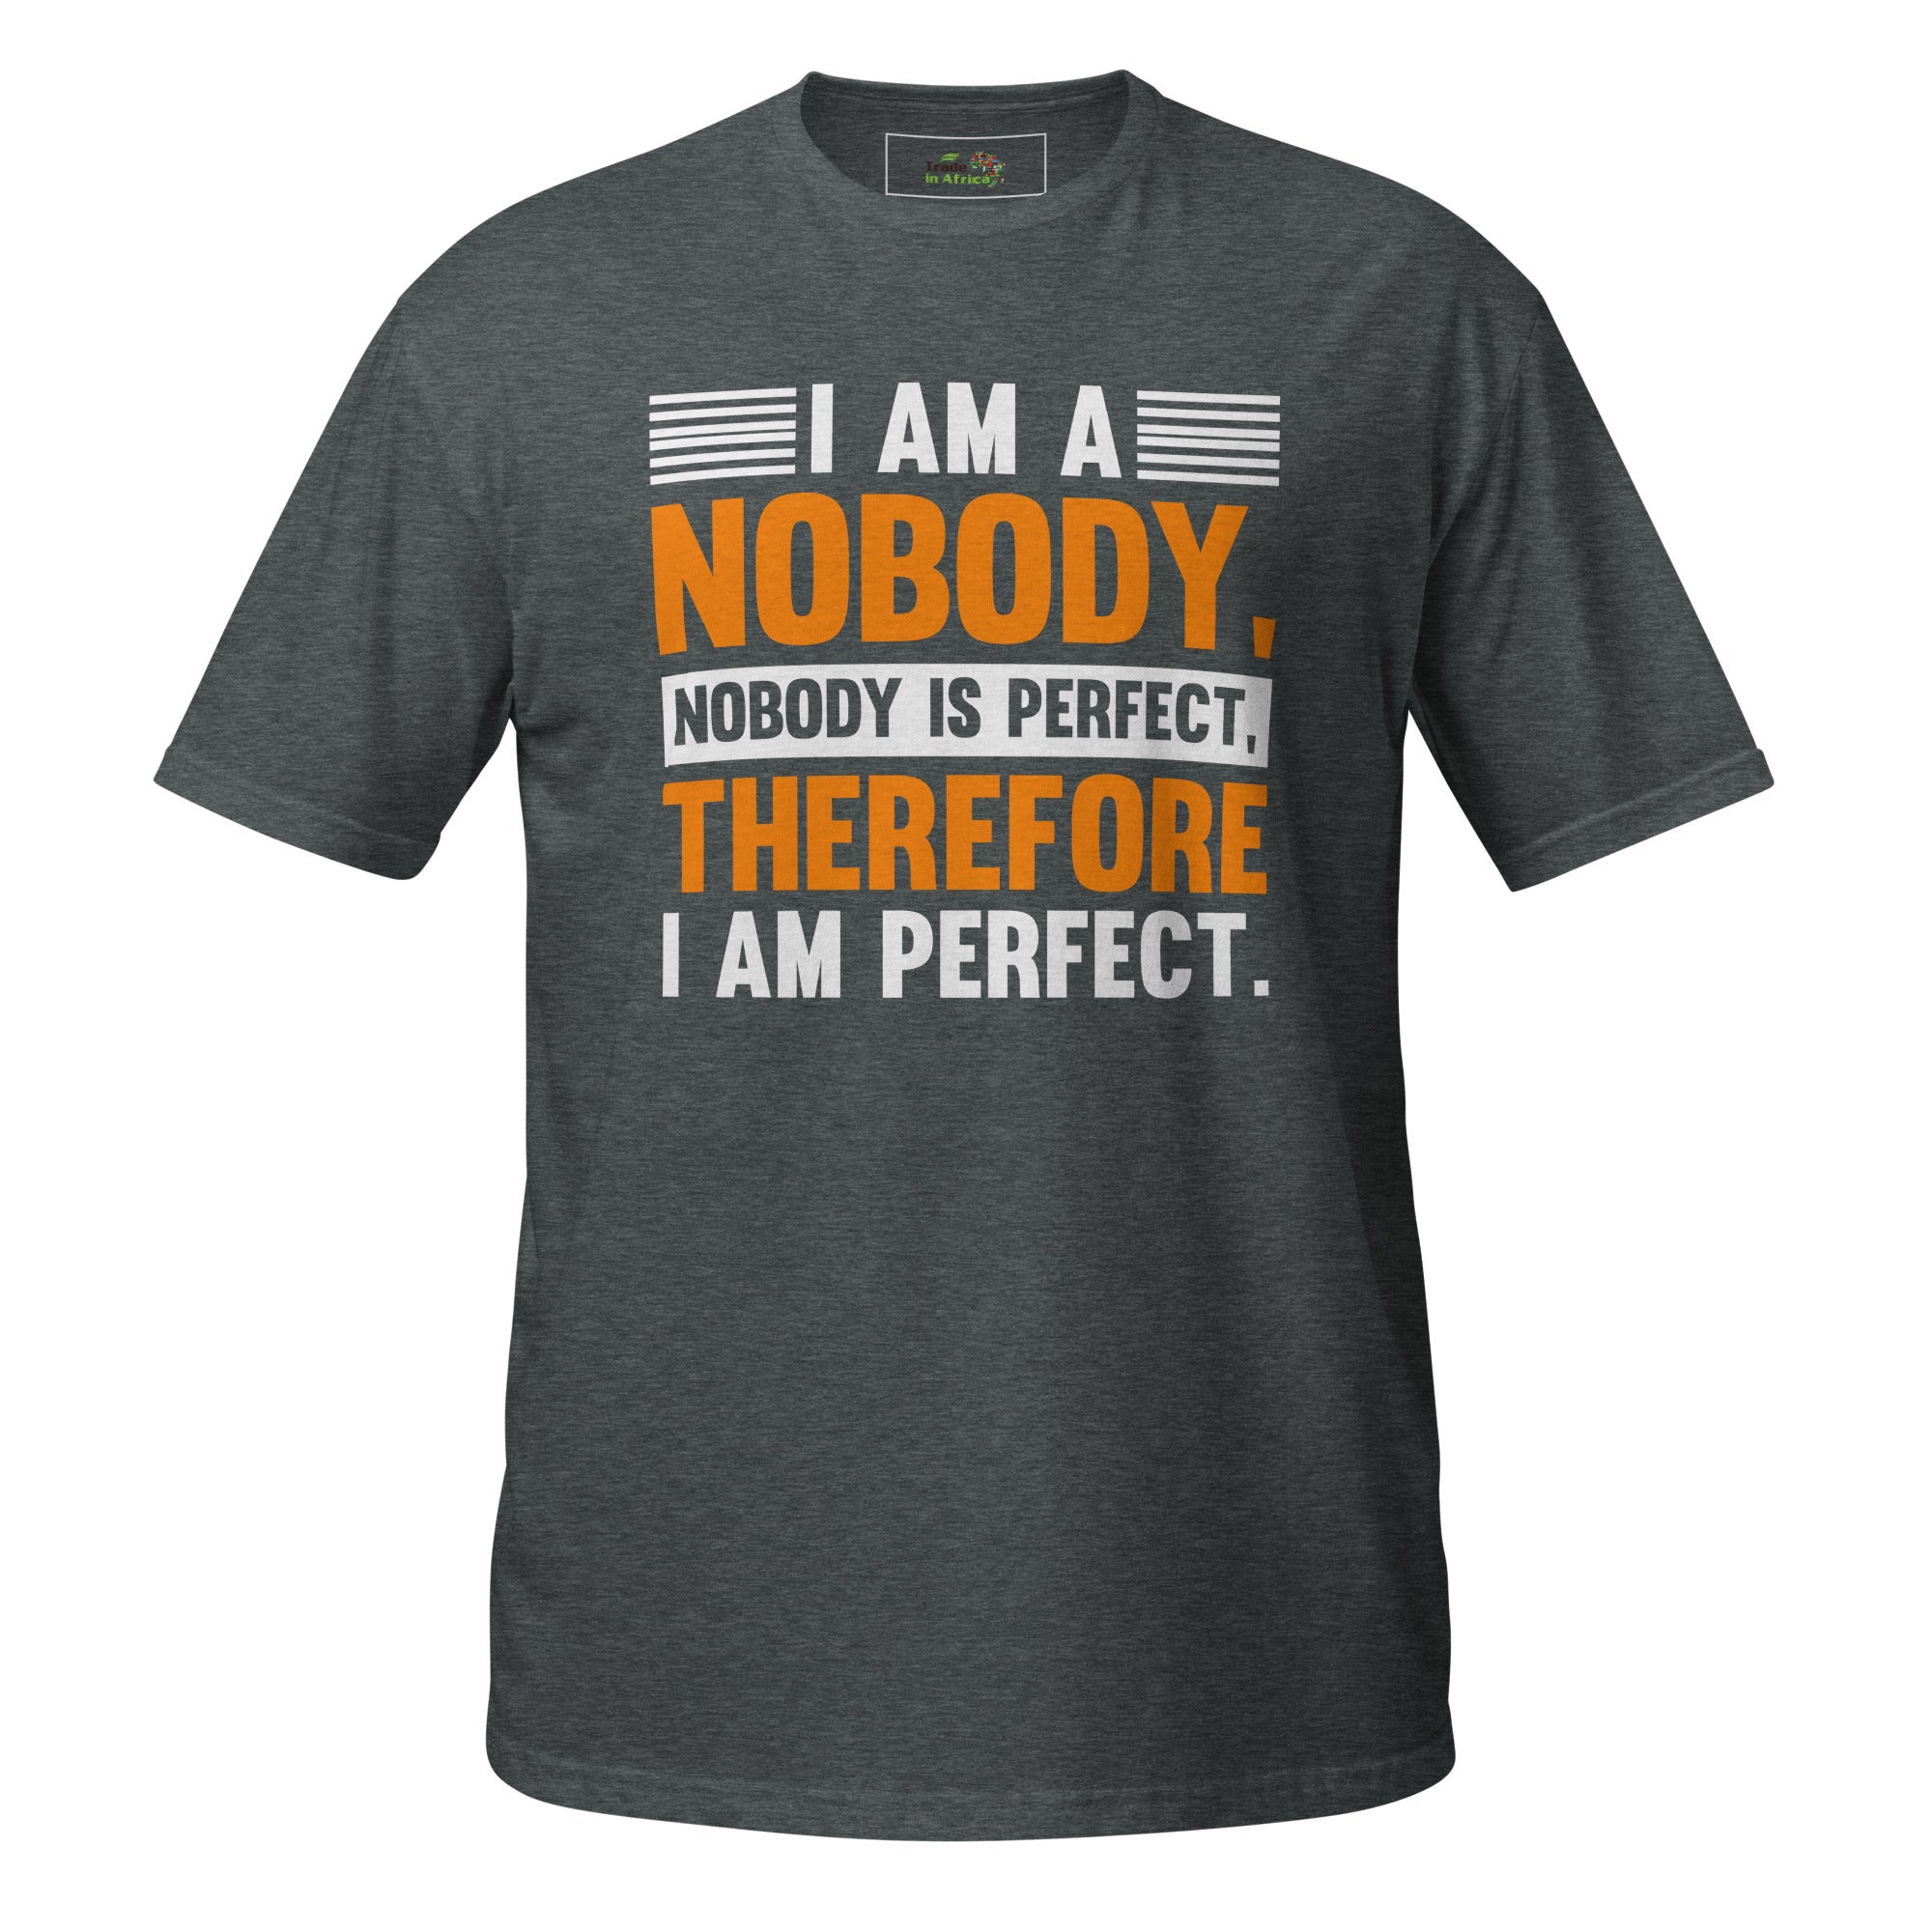 I Am A Nobody - Nobody Is Perfect - Therefore I am Perfect !